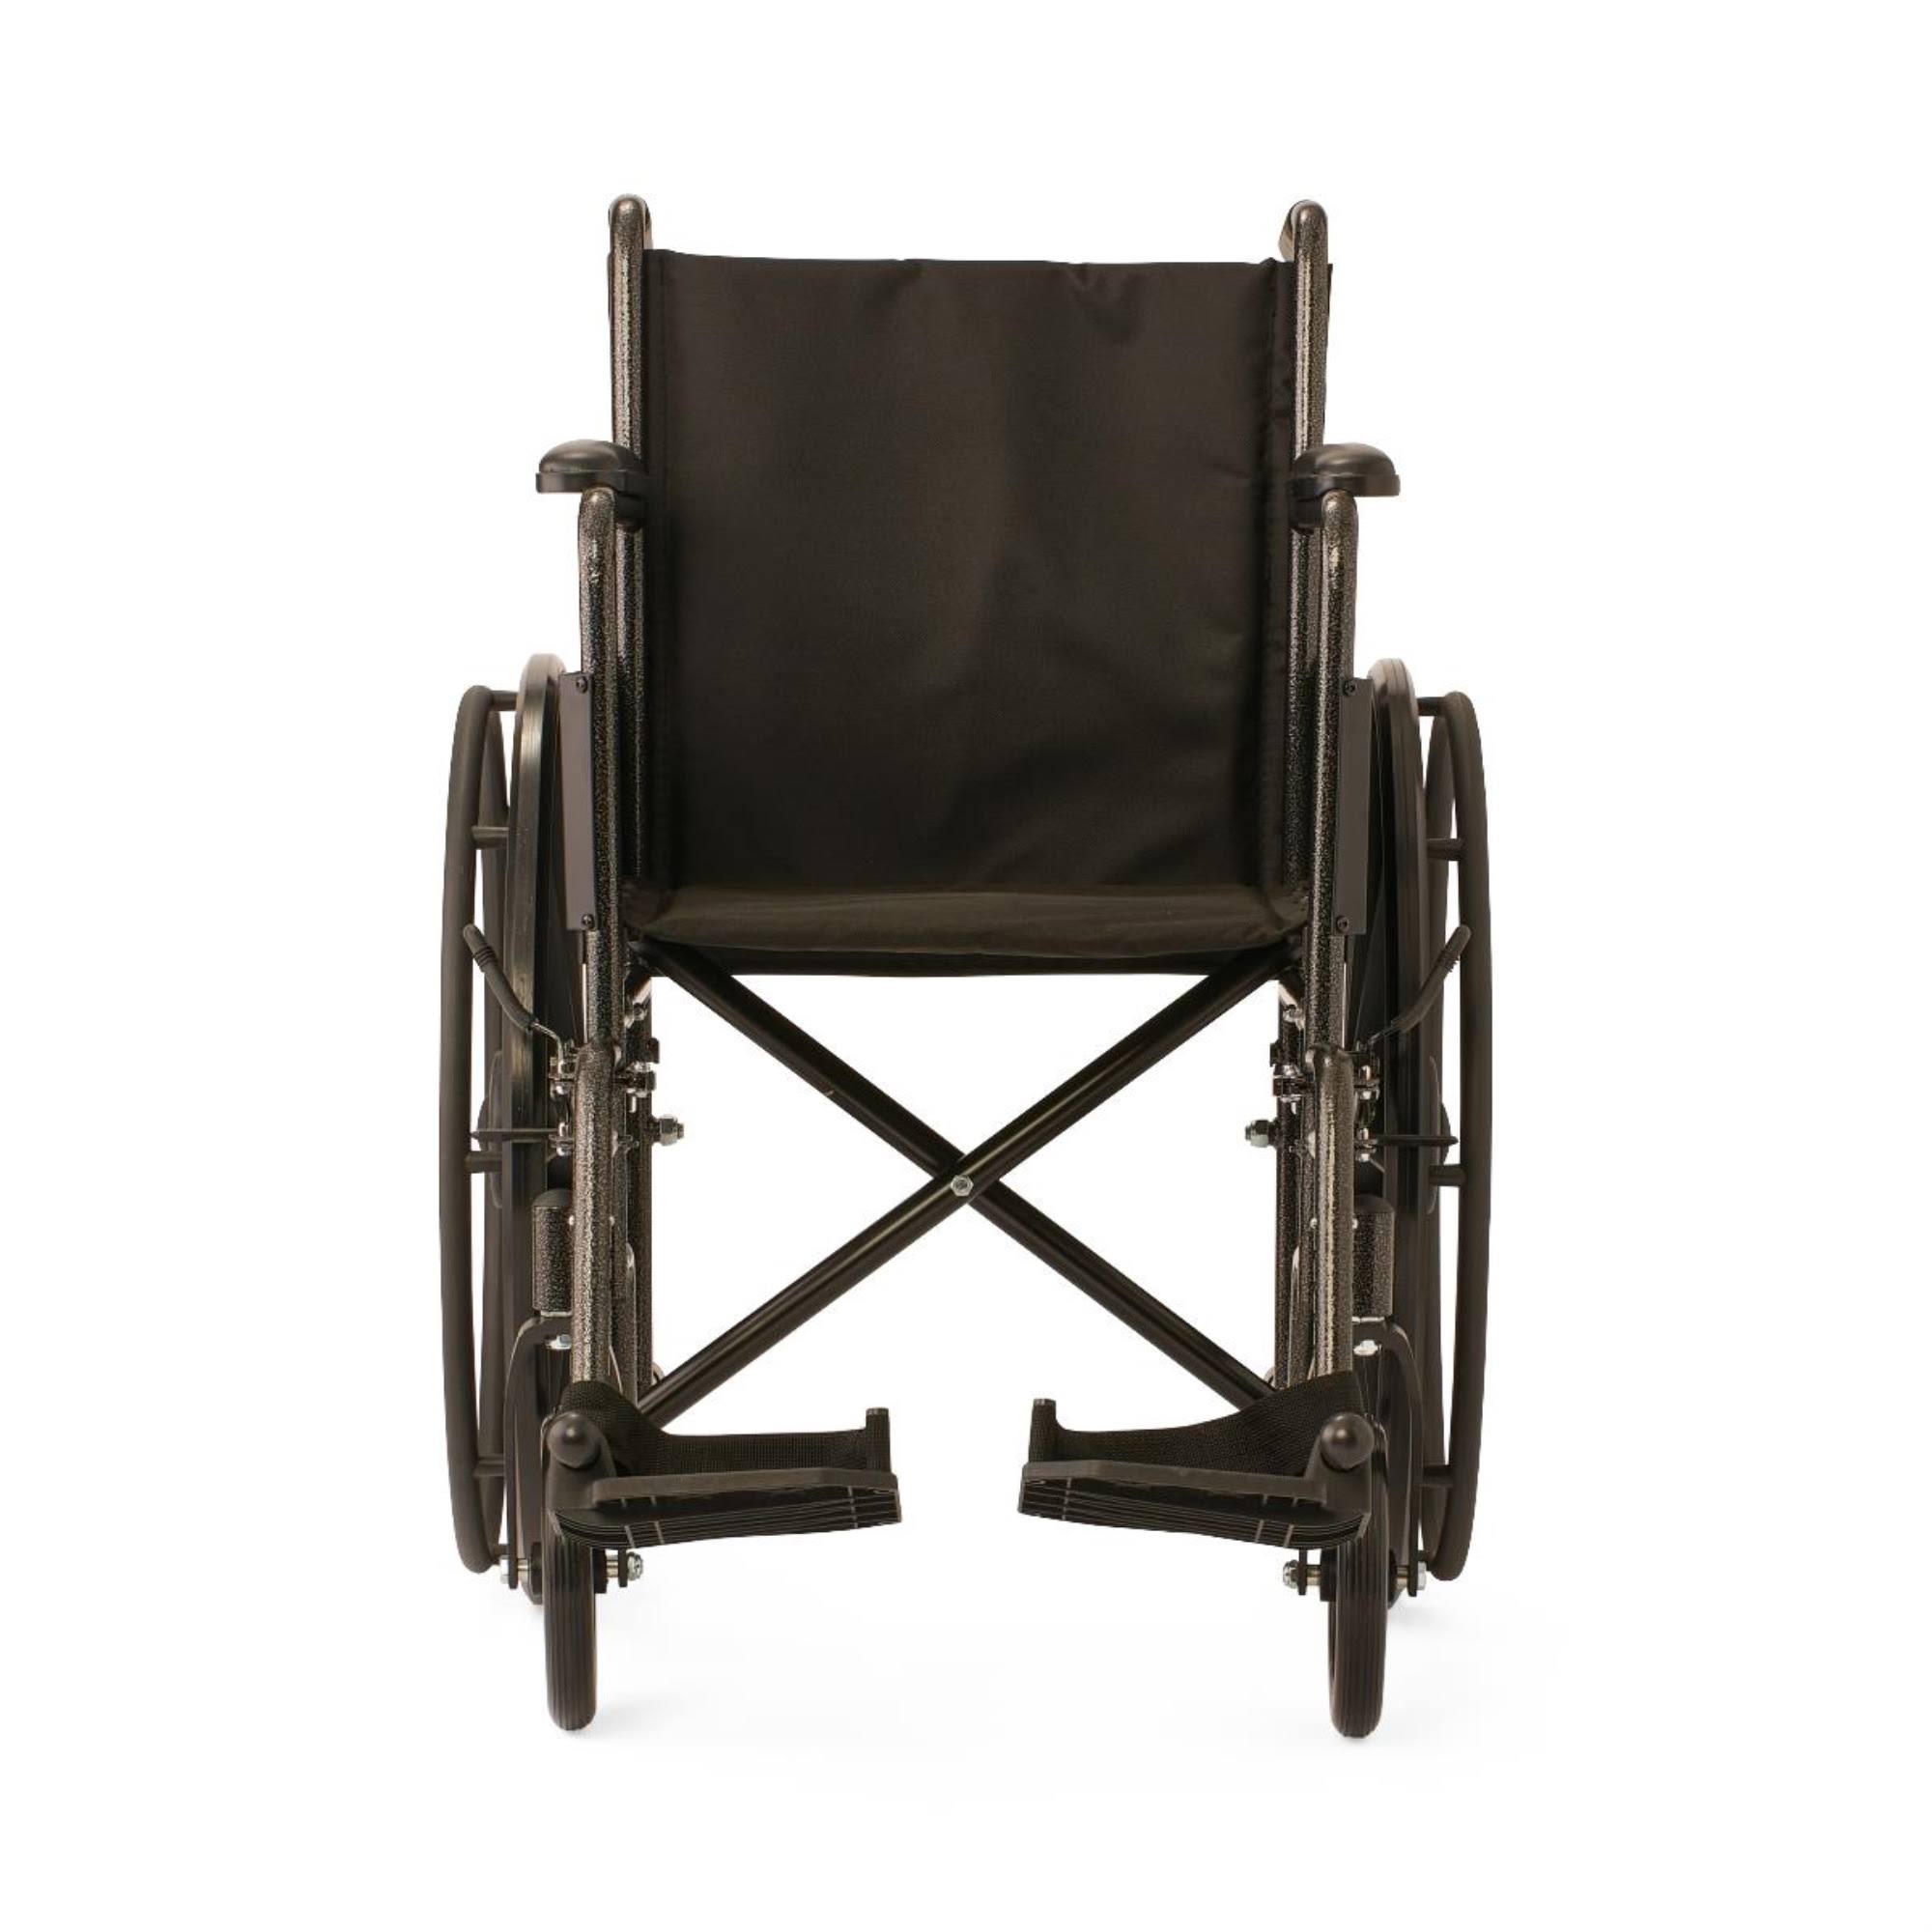 Medline Wheelchairs: 18" Wide K1 Basic Nylon Wheelchair with Full-Length Arms and Swing-Away Leg Rests